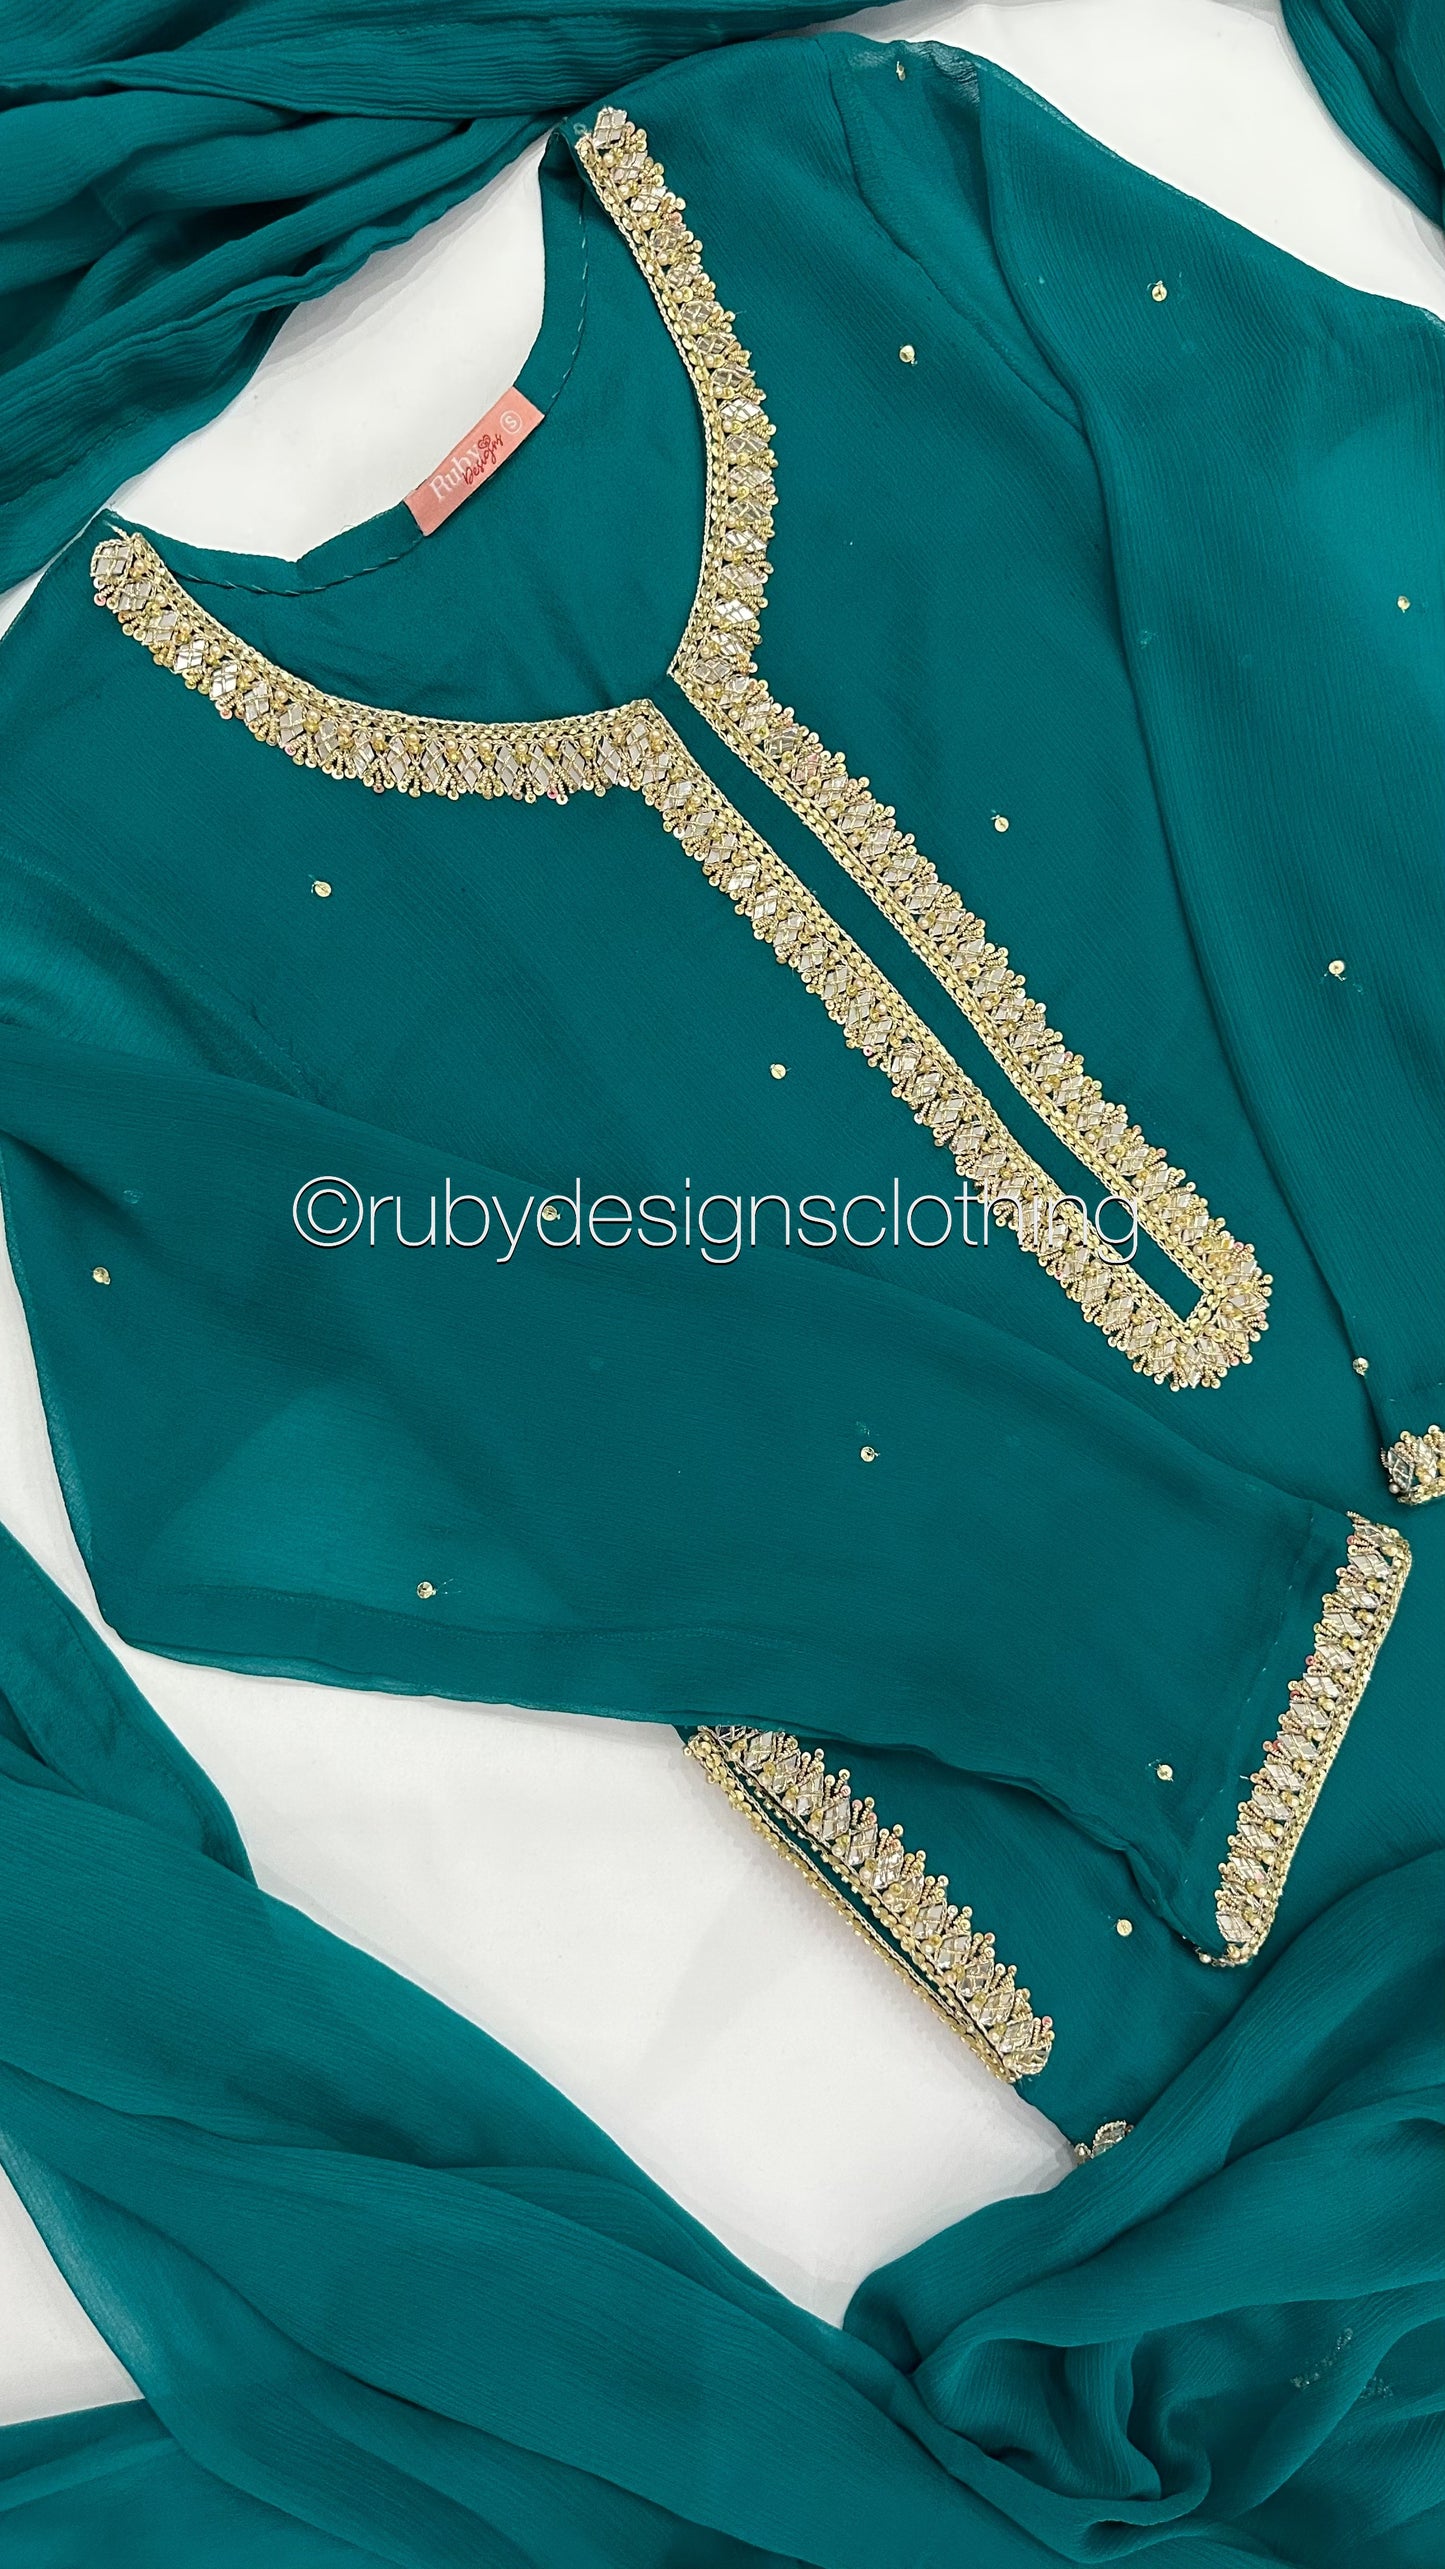 SARA Sea Green/Teal - 3 Piece Chiffon Suit with Pockets and Handwork